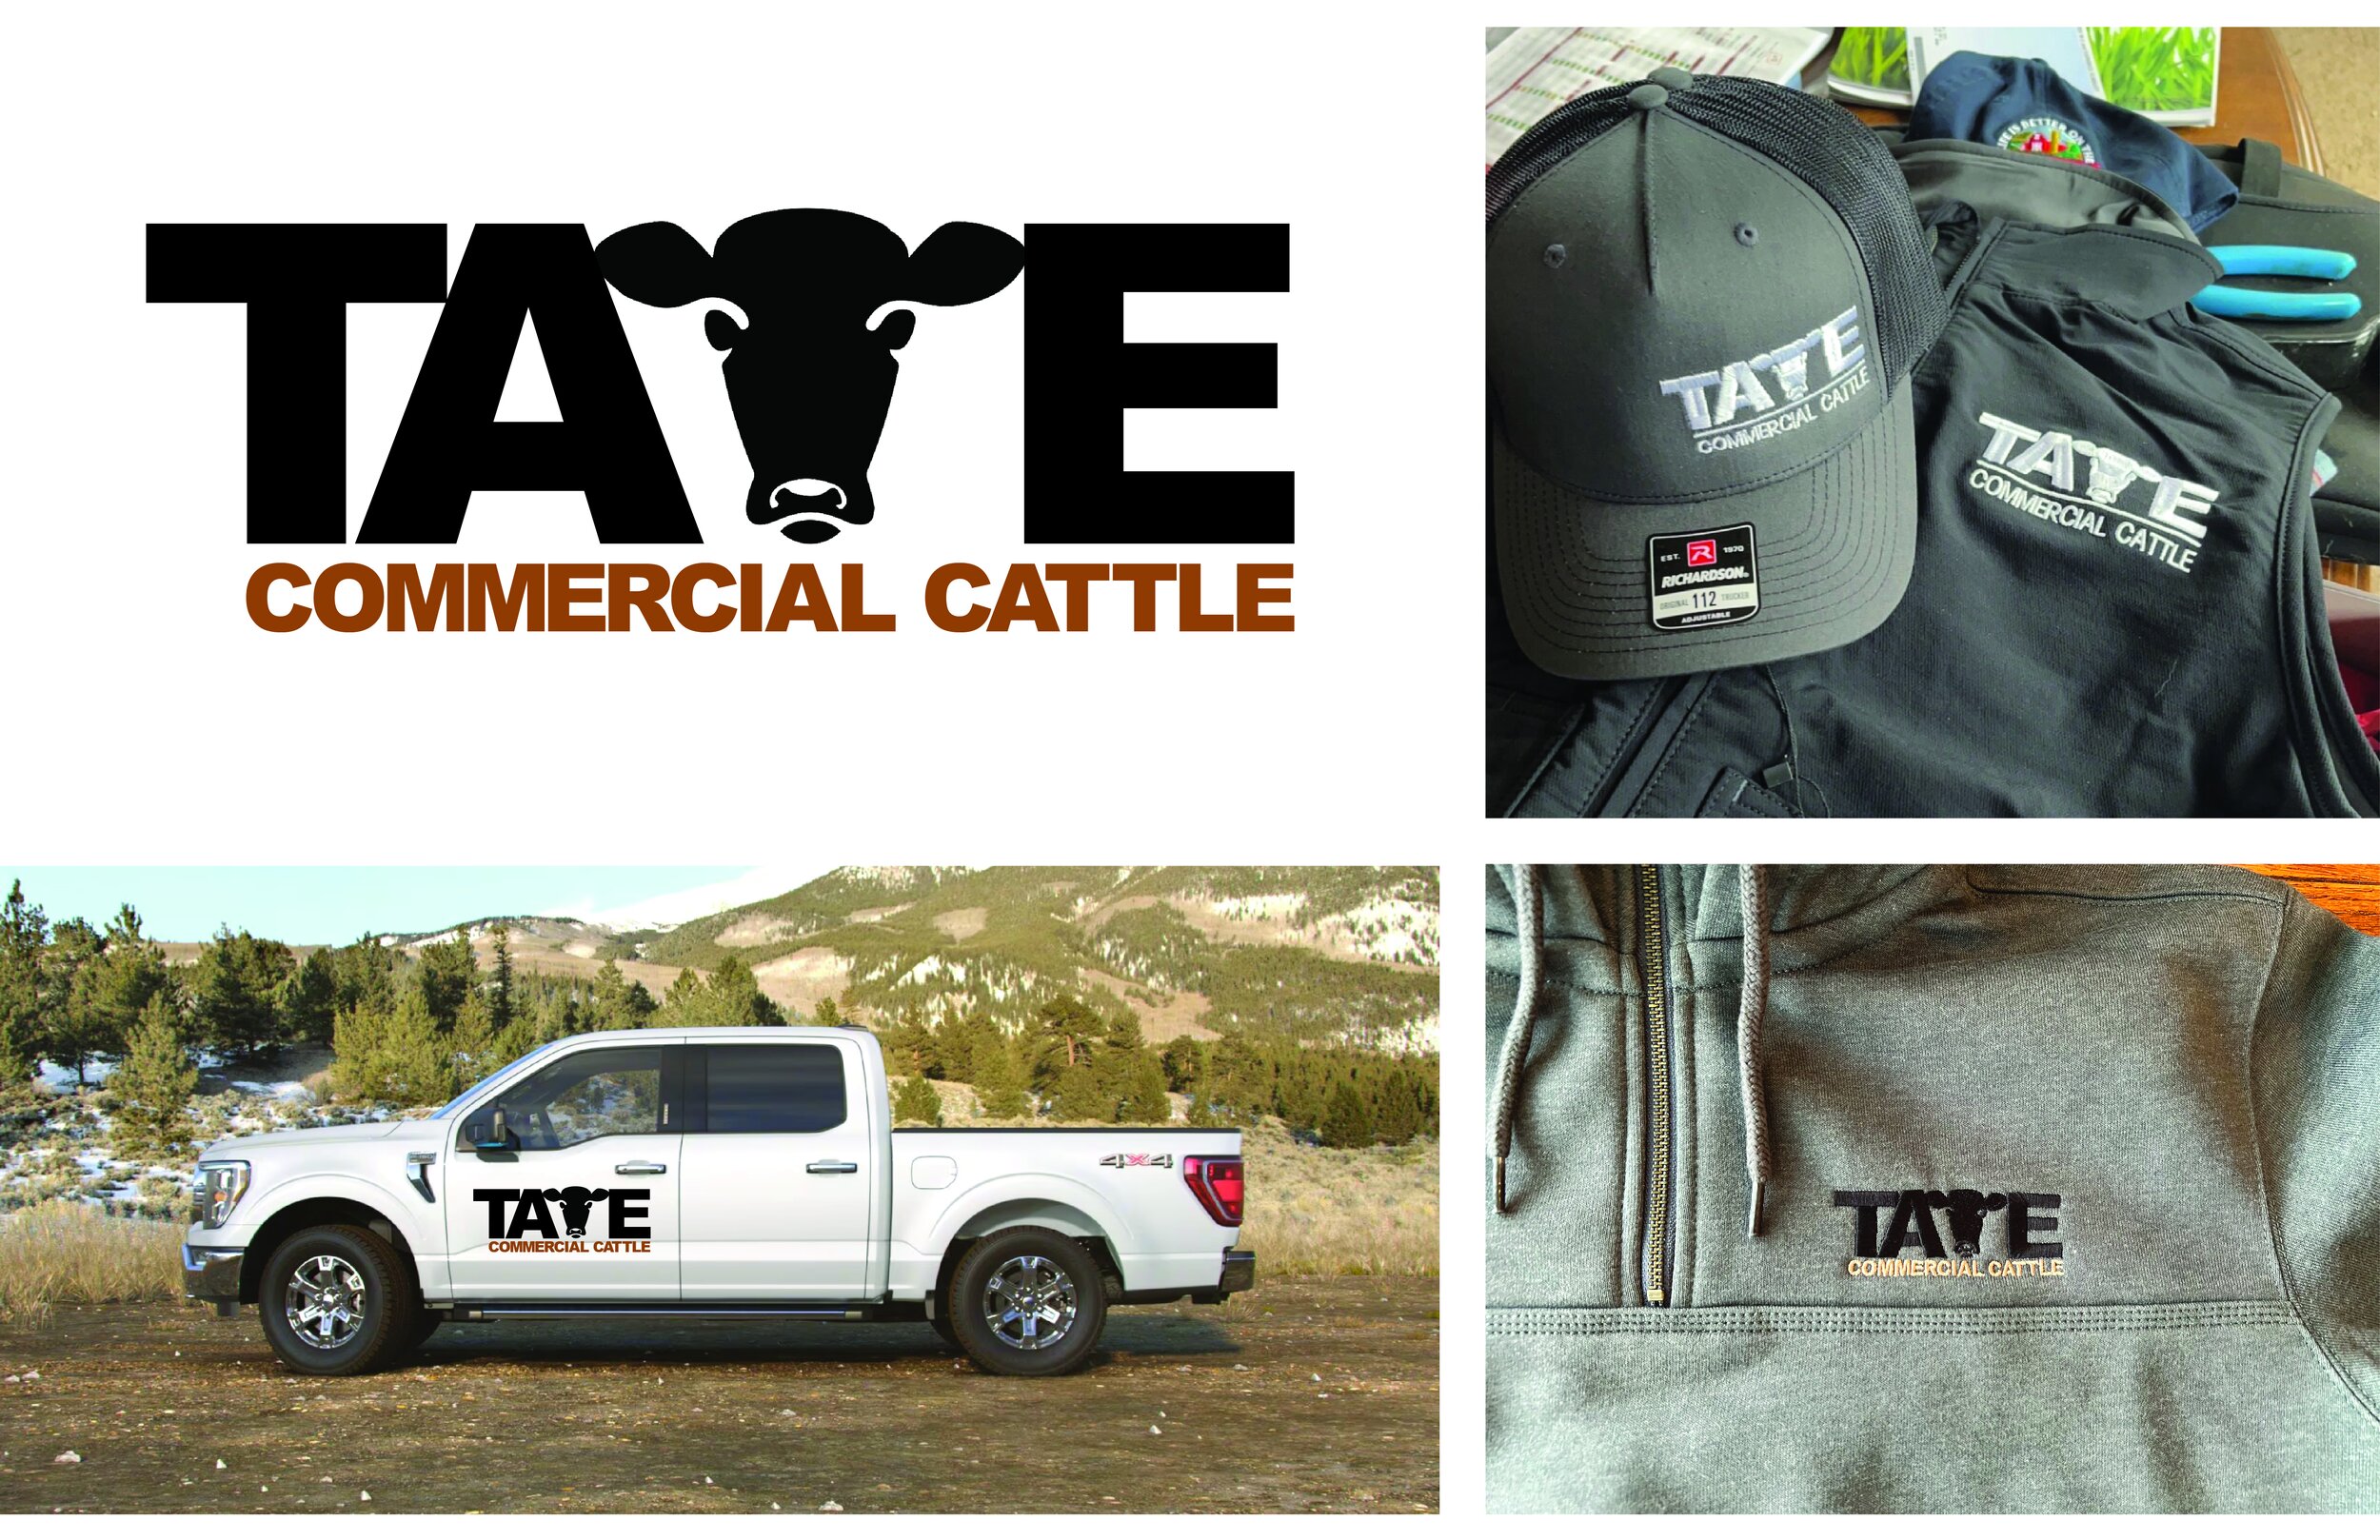  tate commercial cattle 